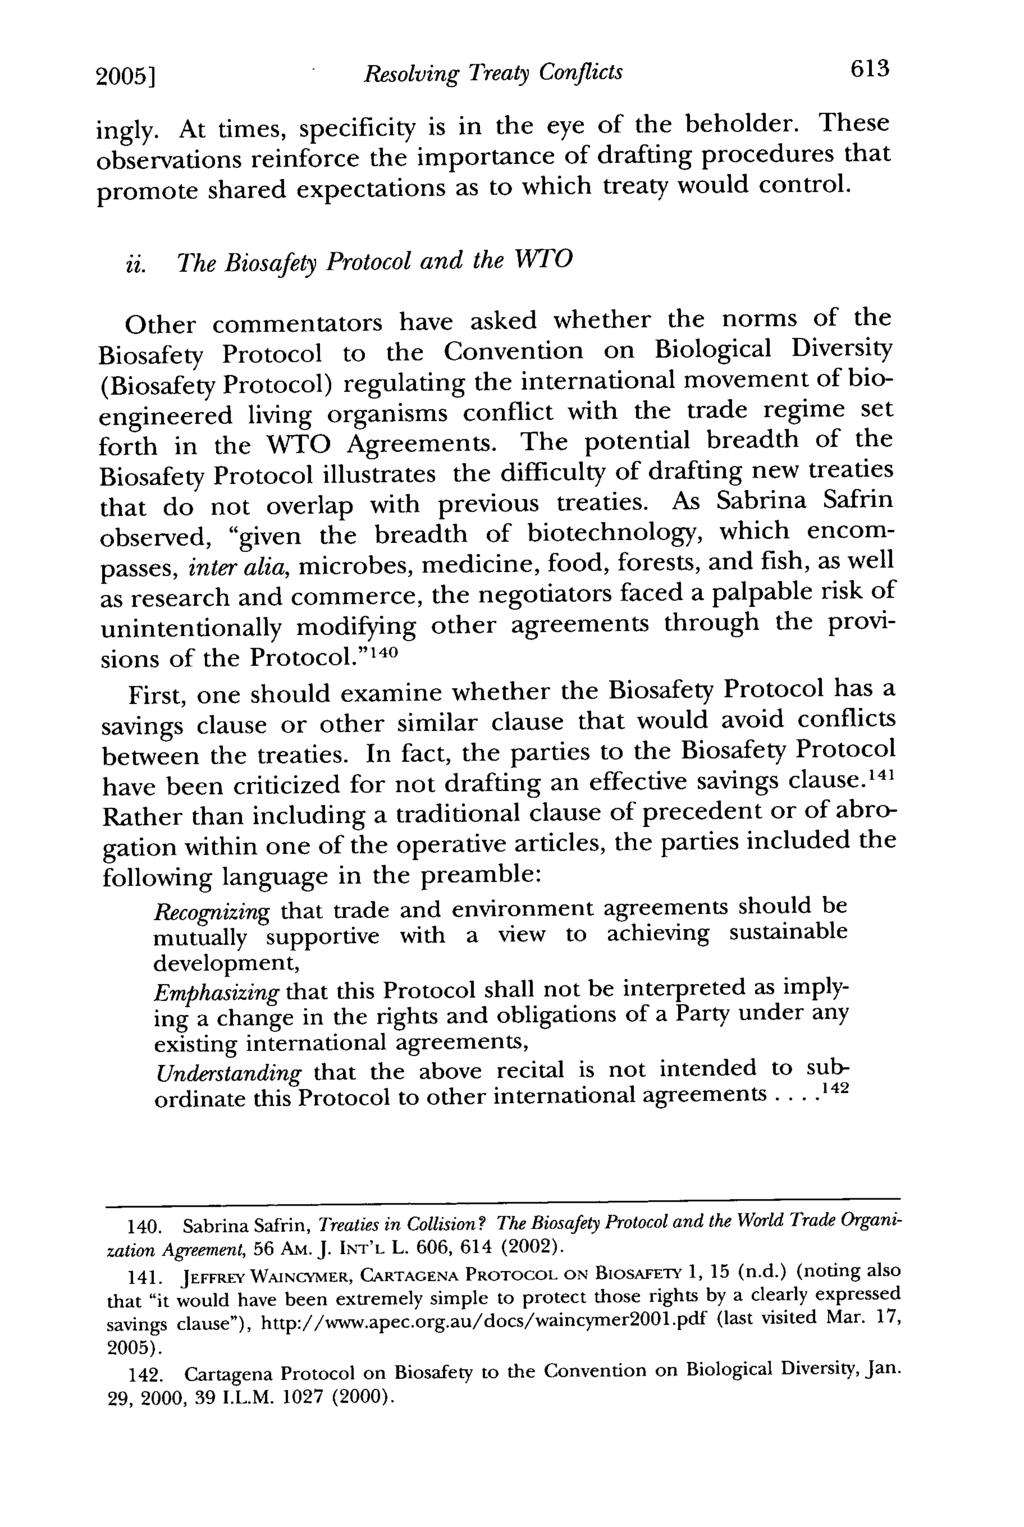 2005] Resolving Treaty Conflicts ingly. At times, specificity is in the eye of the beholder.